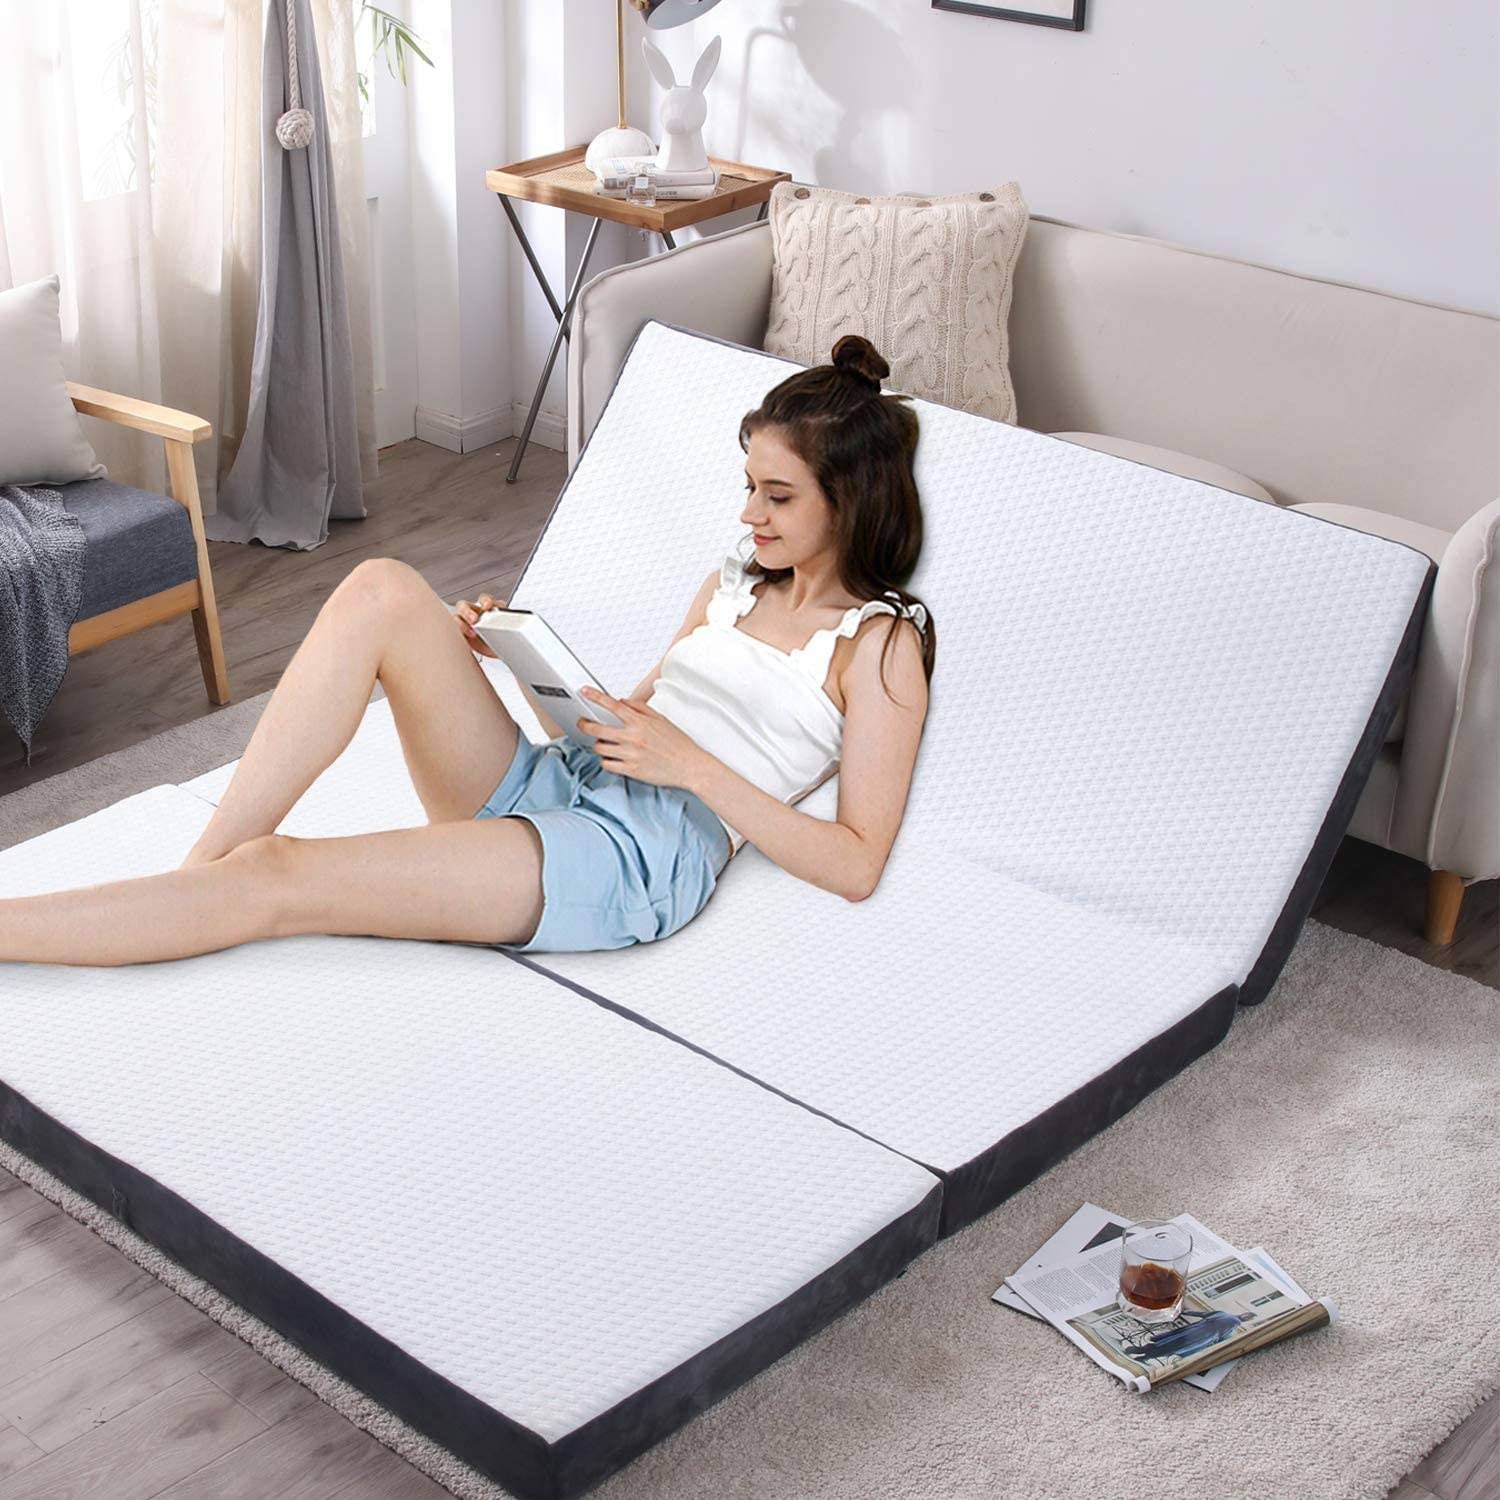 A person reading on the mattress